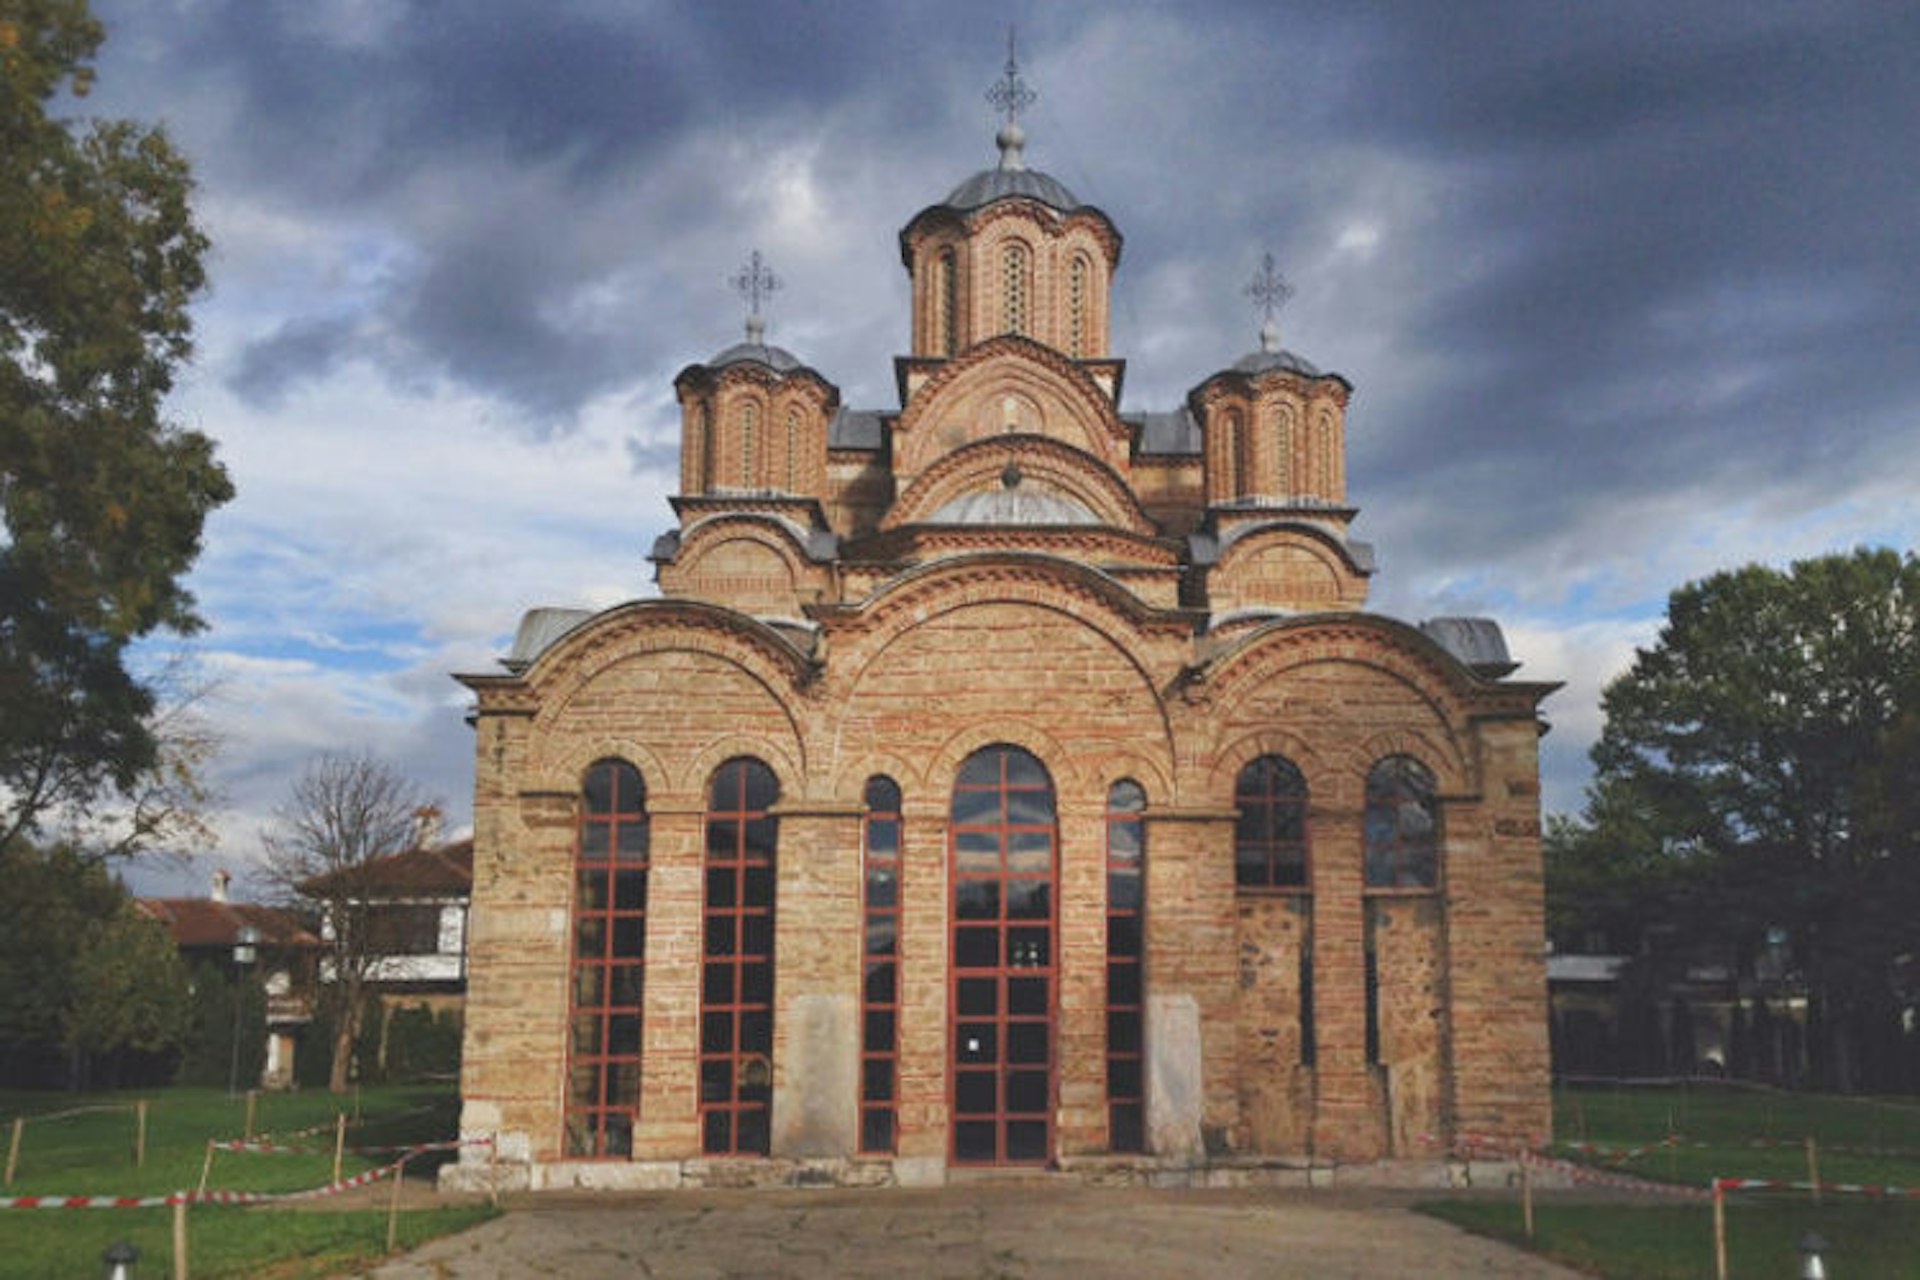 Unesco-listed 14th-century Gračanica Monastery. Image by Larissa Olenicoff / Lonely Planet